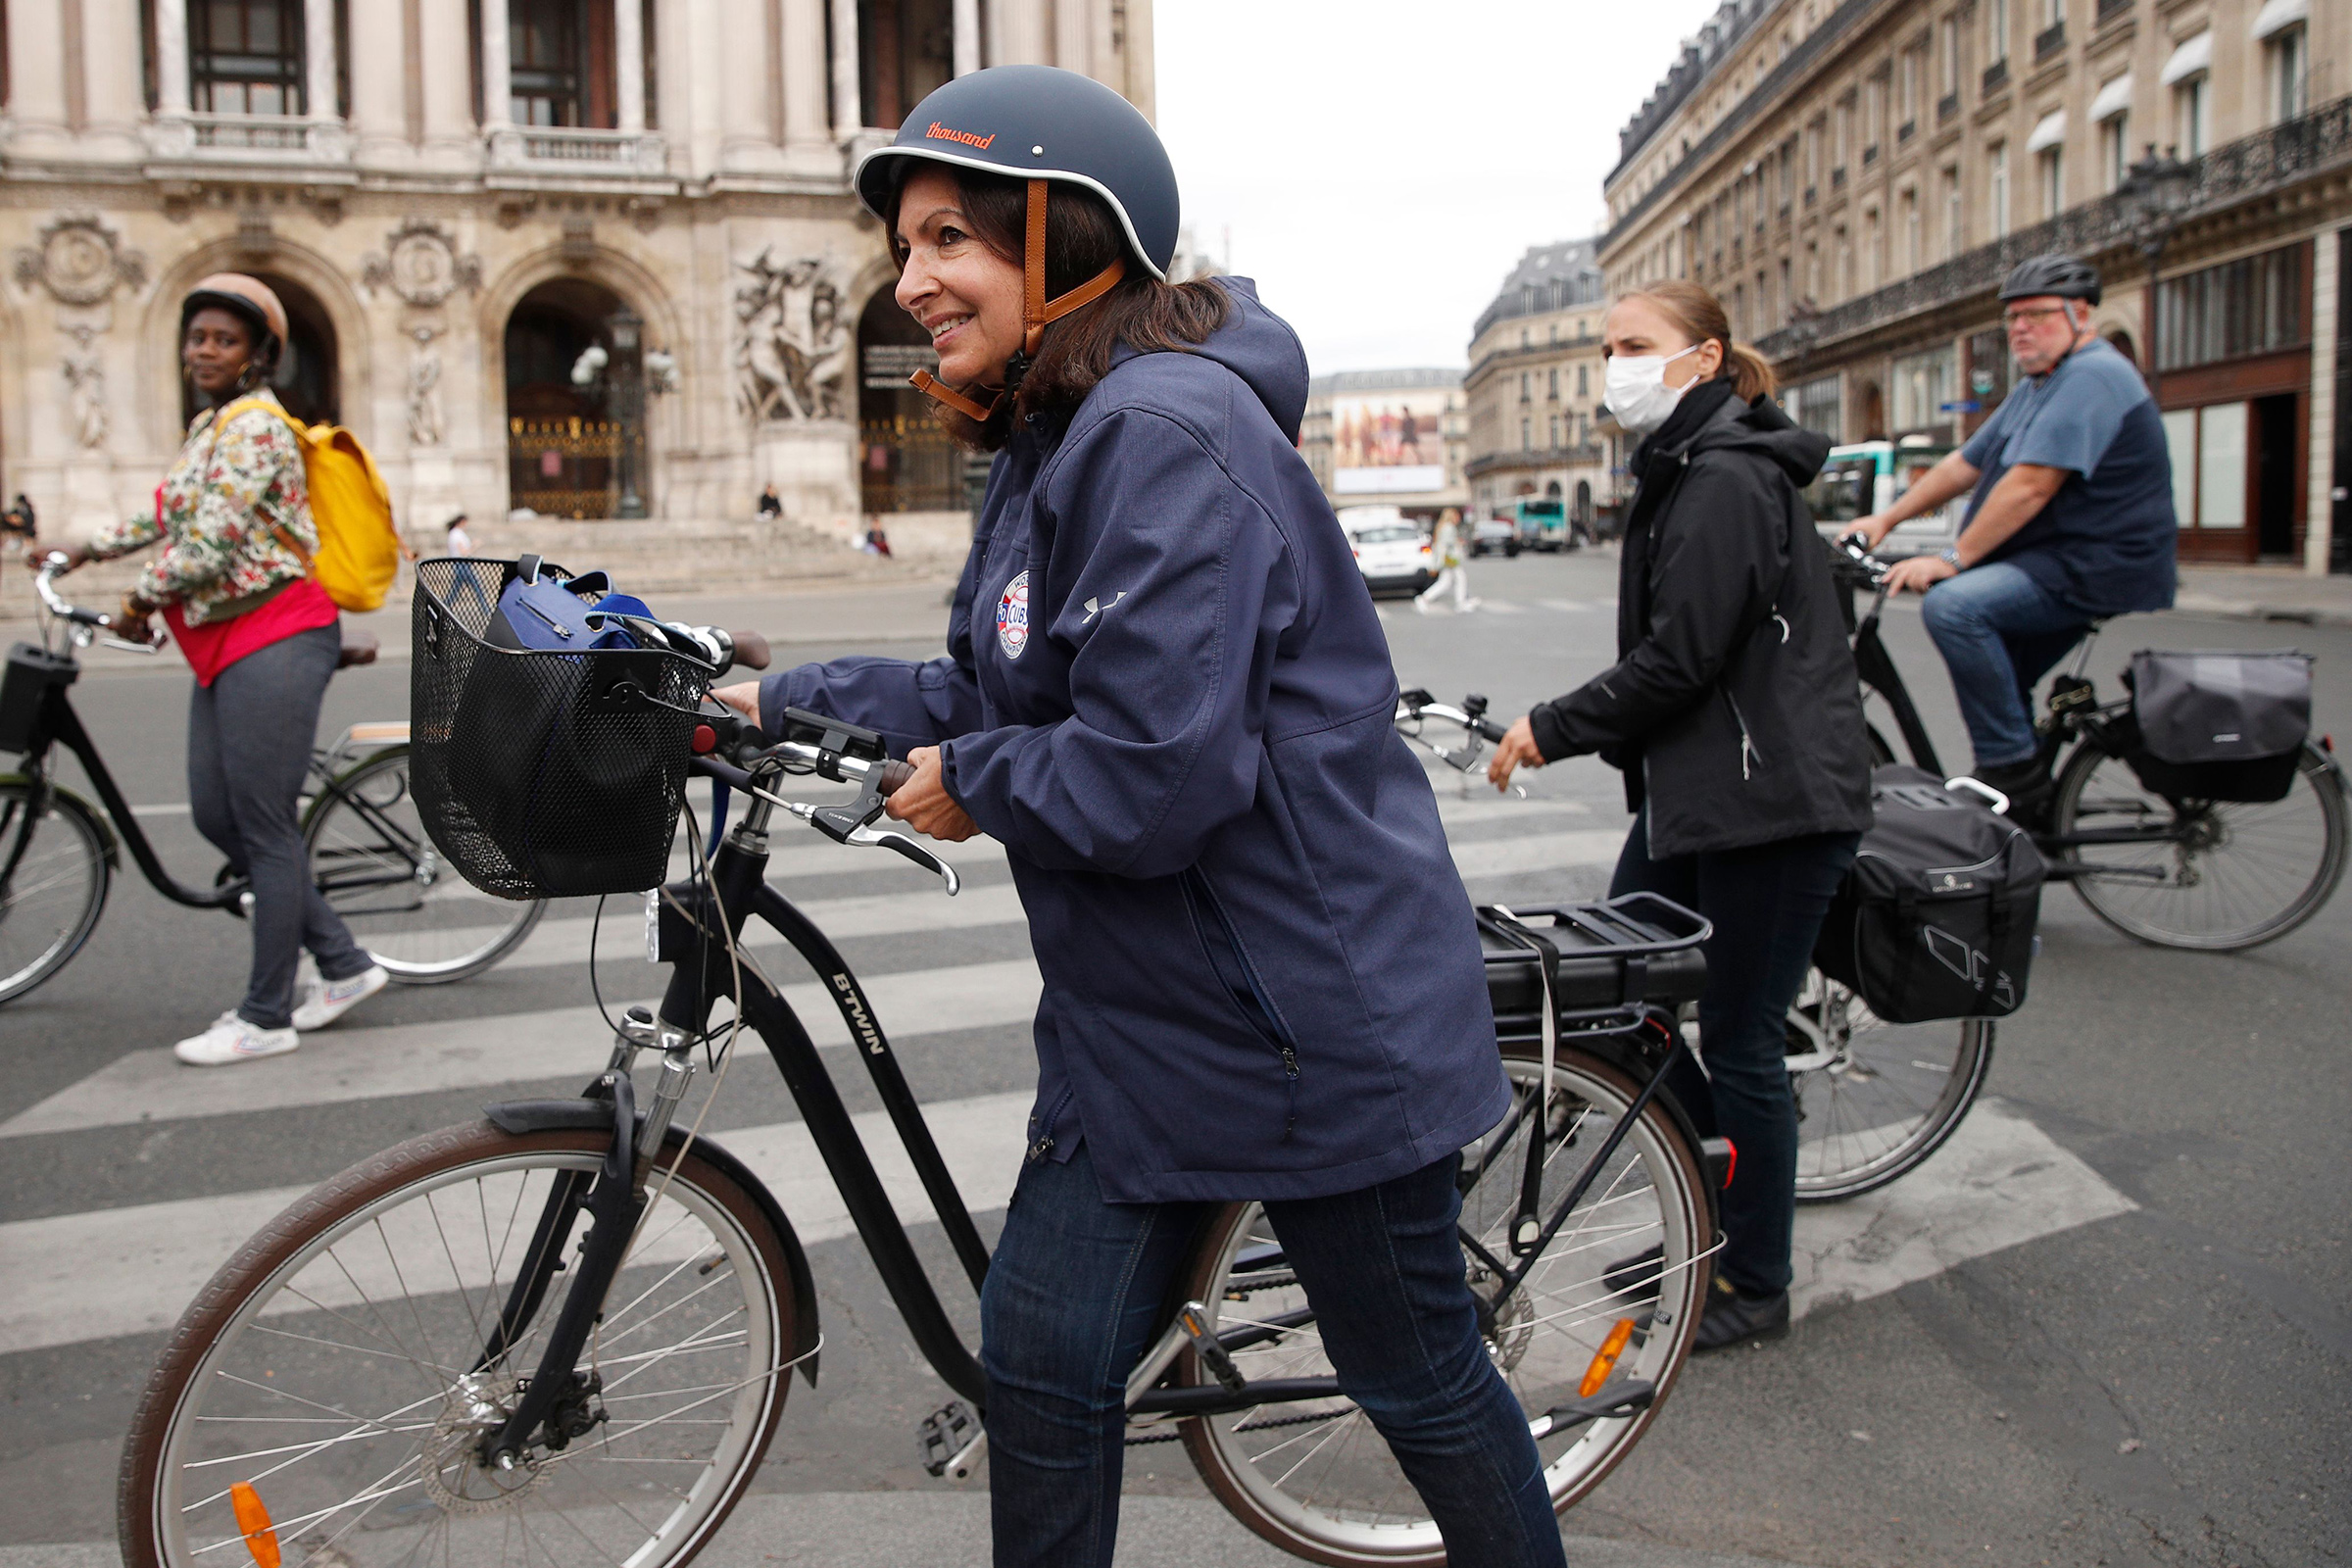 Hidalgo says she wants Paris to rank alongside Amsterdam and Copenhagen as havens for cyclists